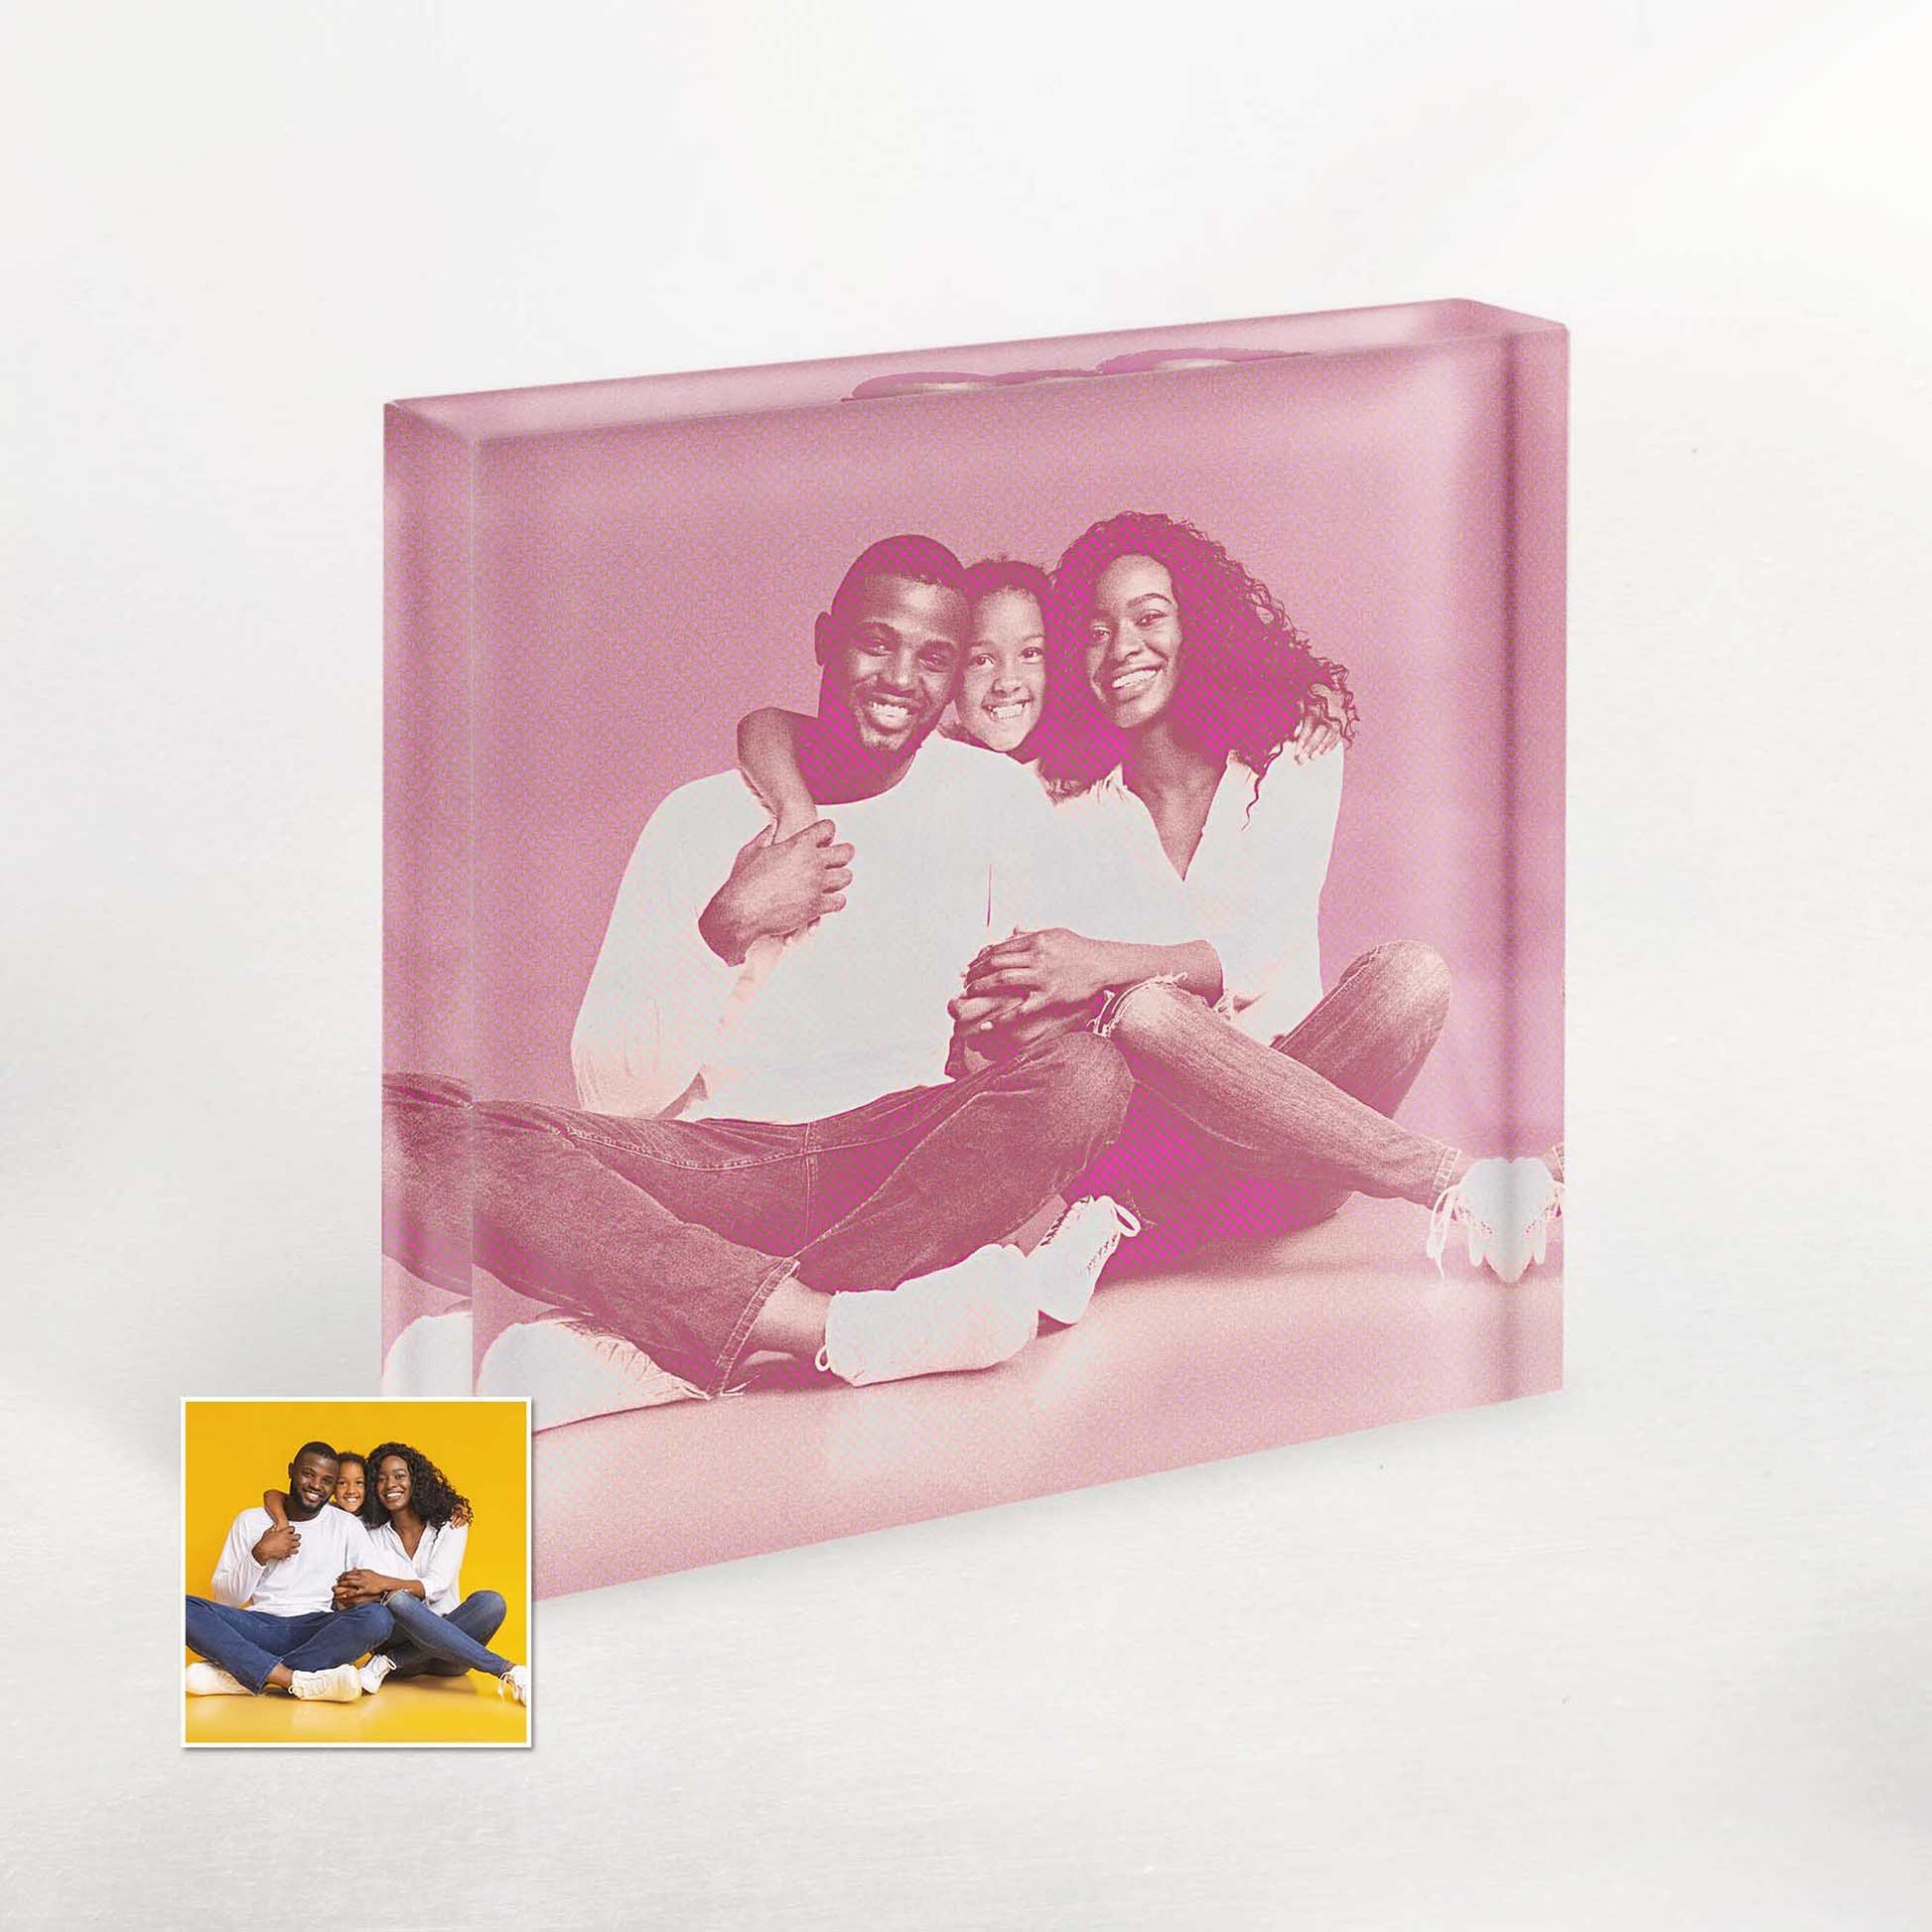 Personalised Pink Pop Halftone Acrylic Block Photo: A perfect combination of chic and happiness. This vibrant and vivid home decor item adds a burst of energy and joy to your space. Its charming halftone design